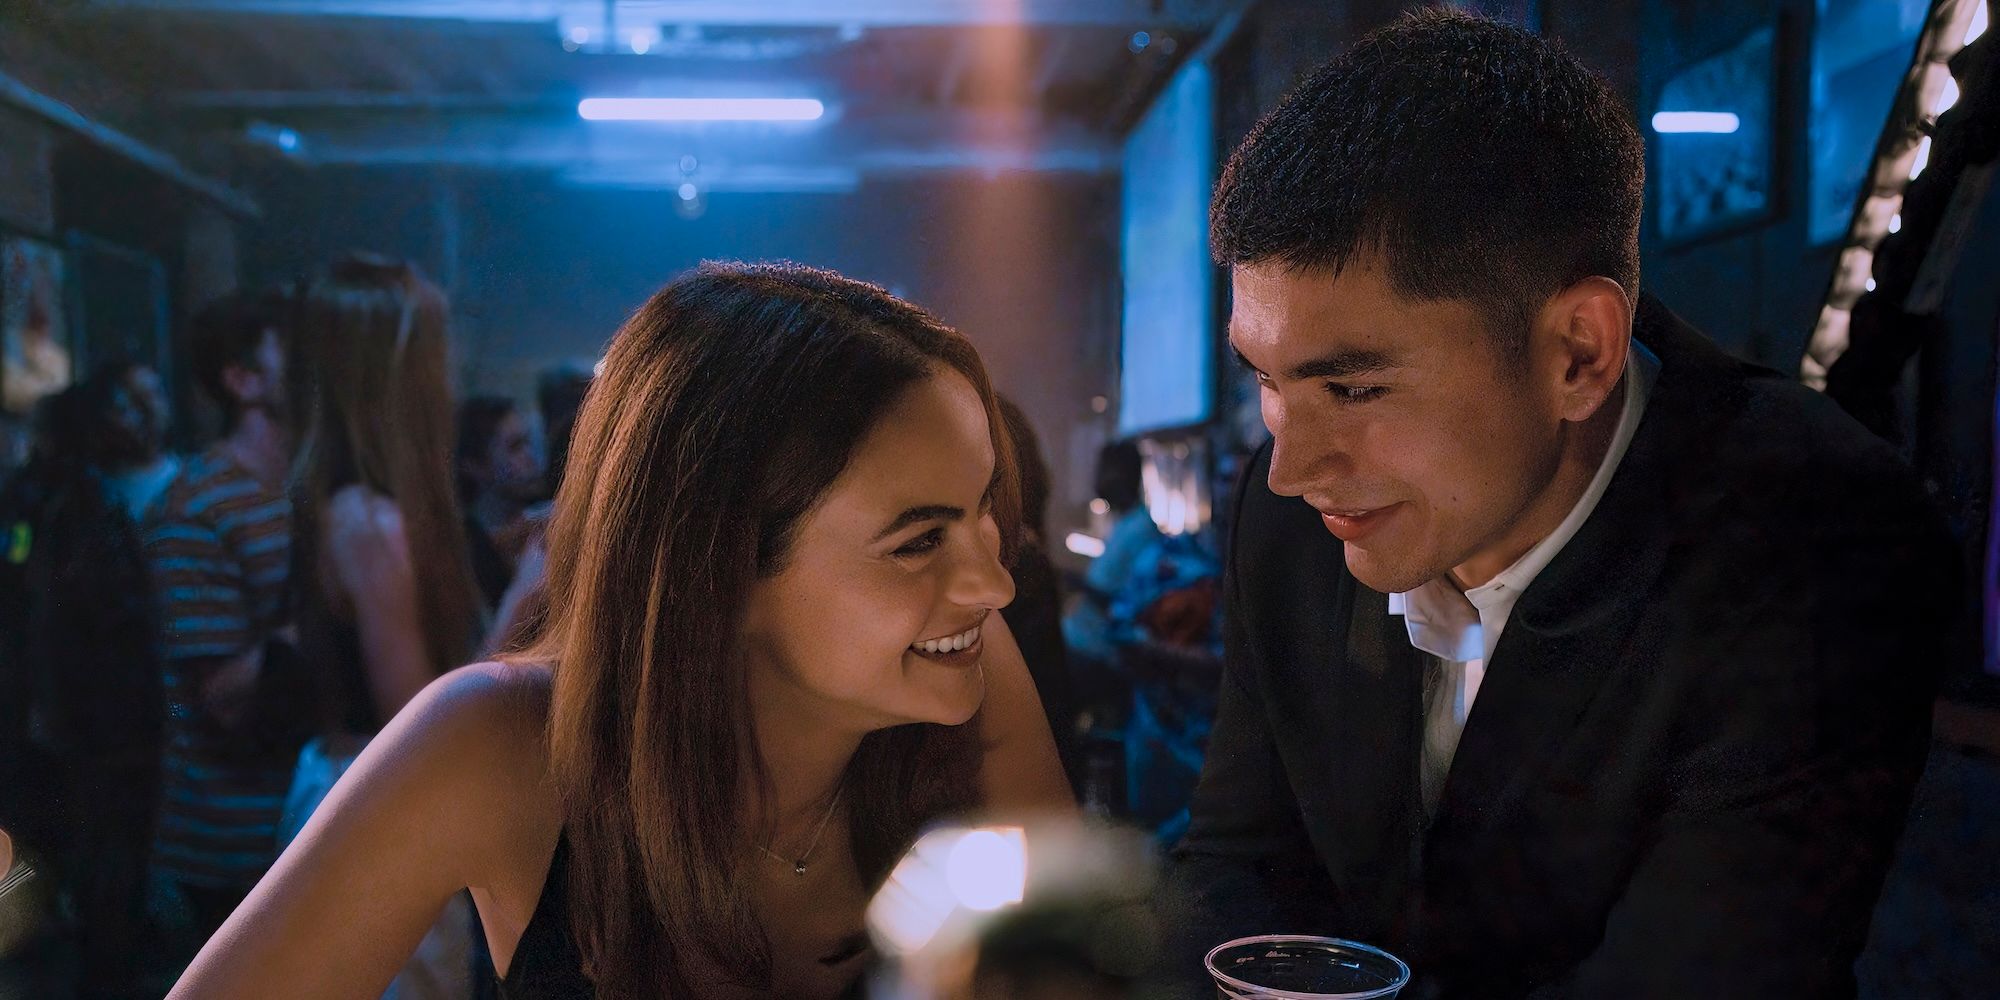 Ana and William laugh together in a club in Upgraded